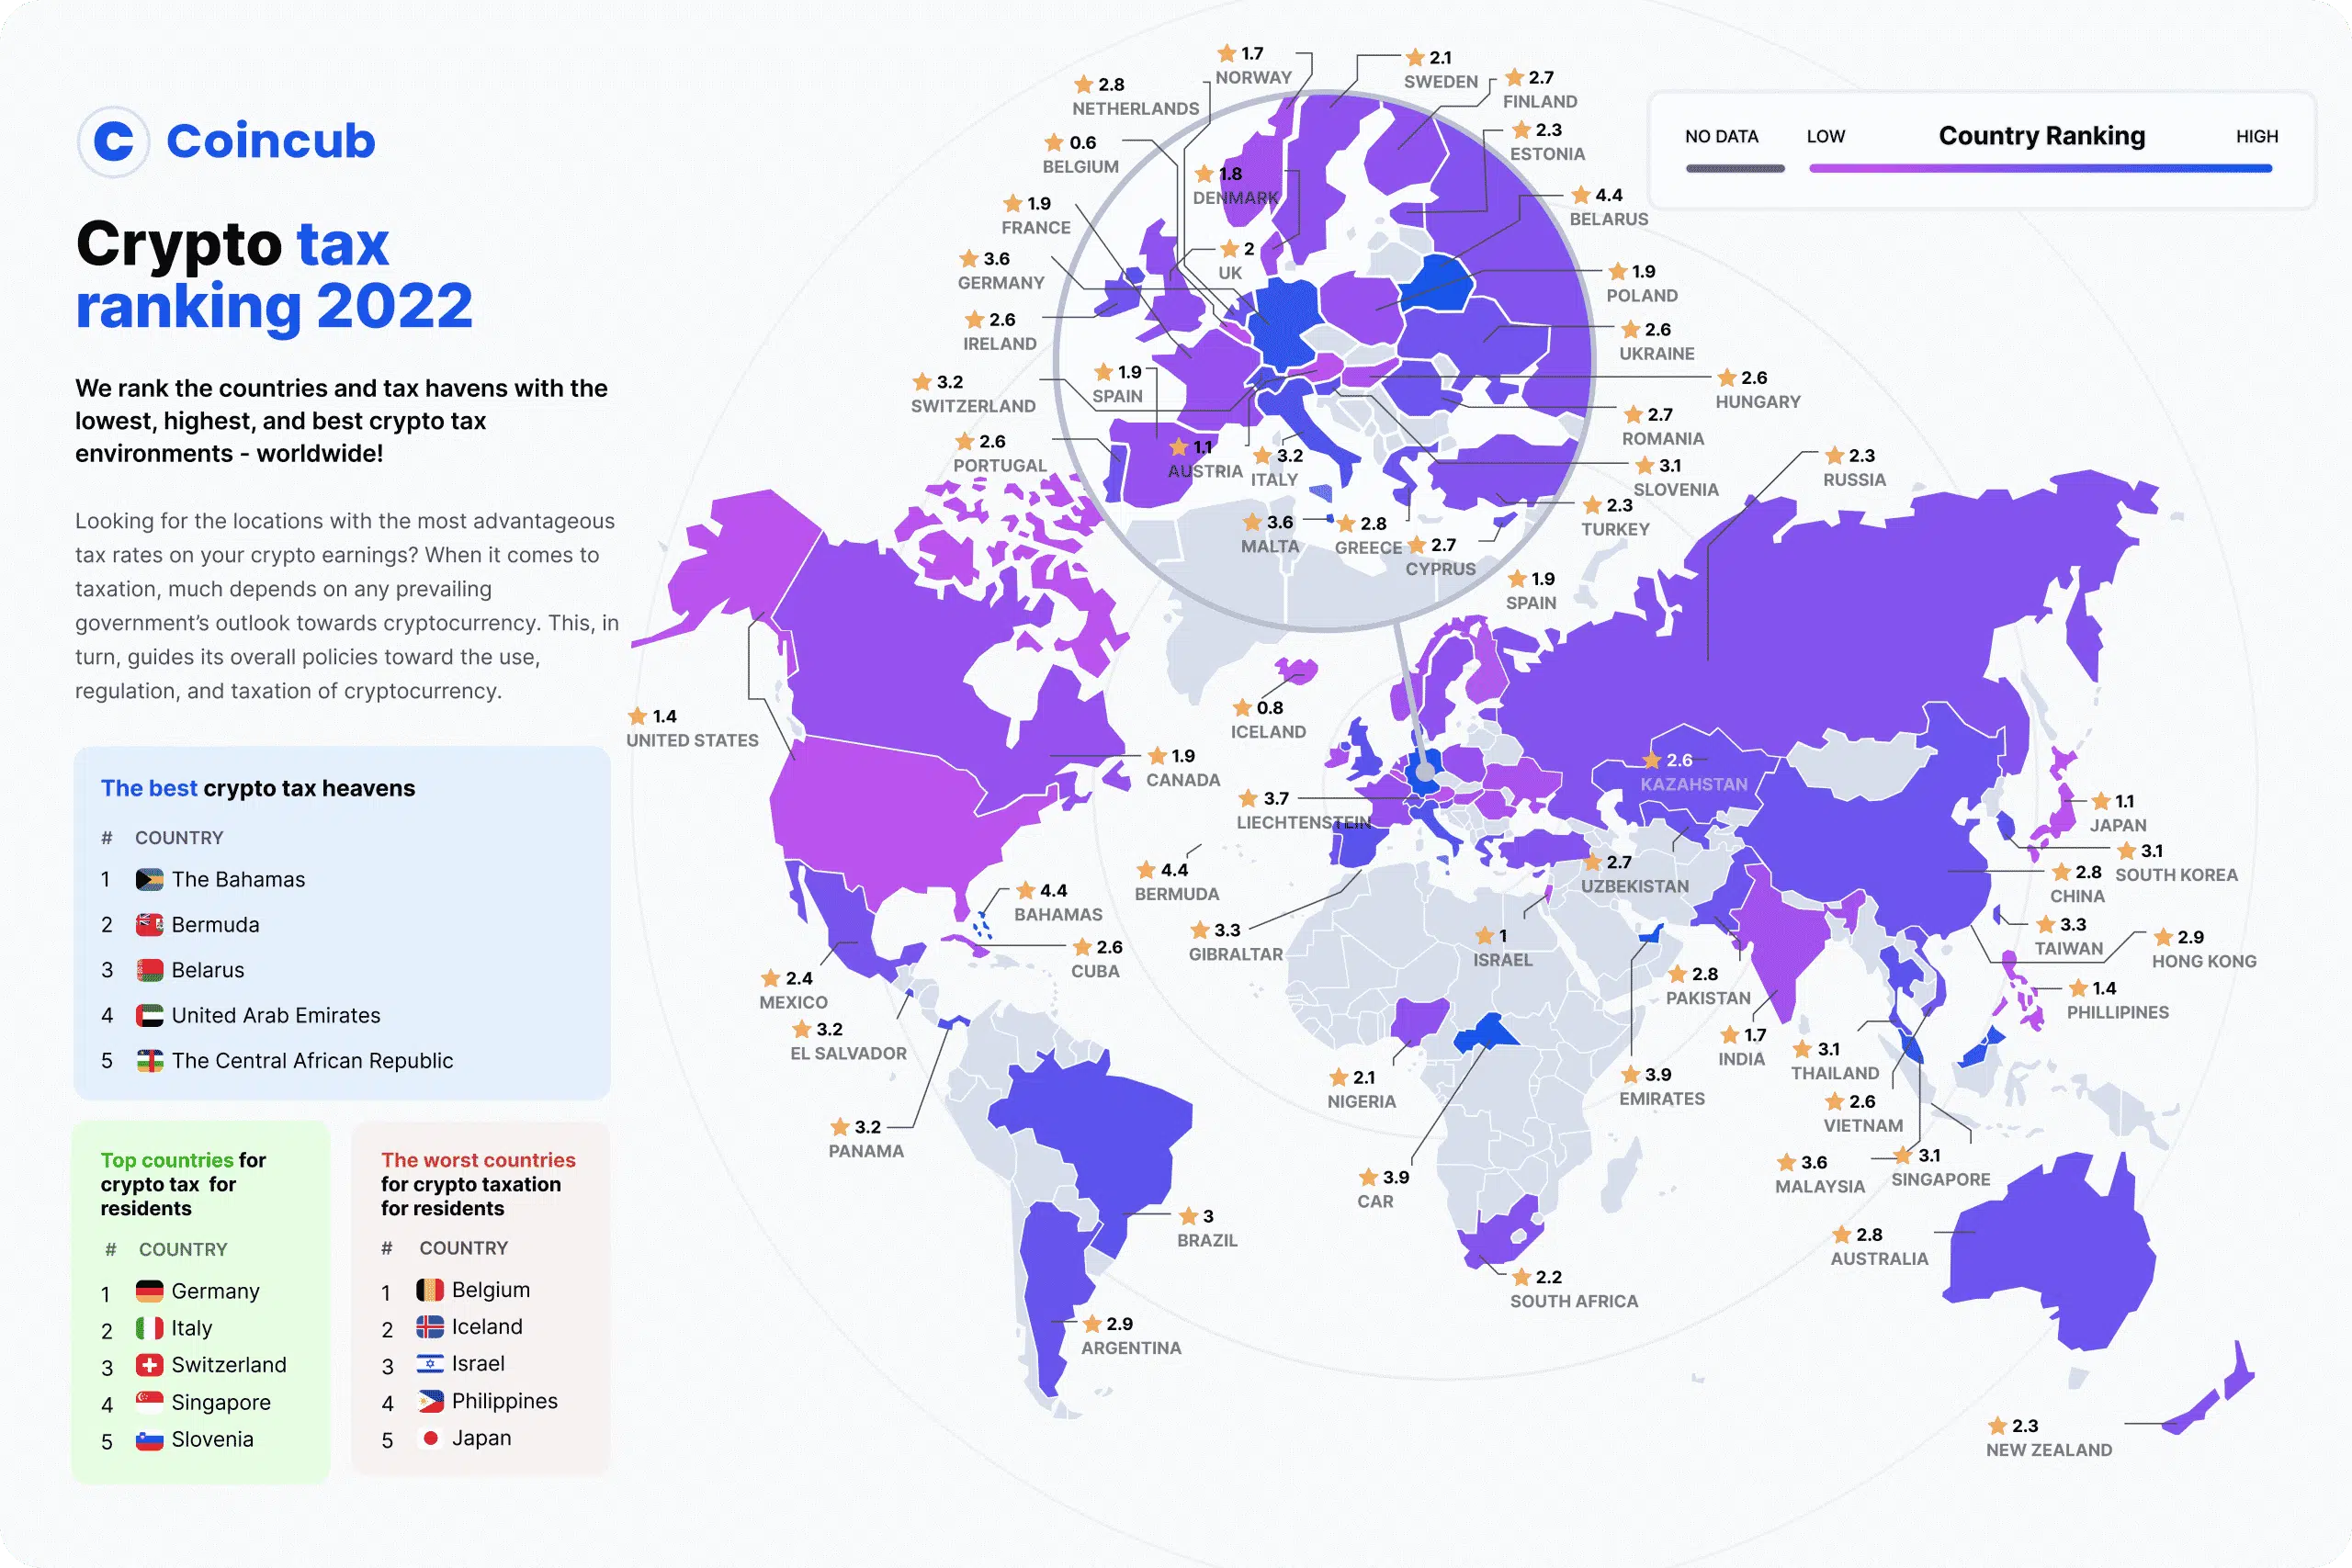 Norway leads the world with largest average breast size. US ranks